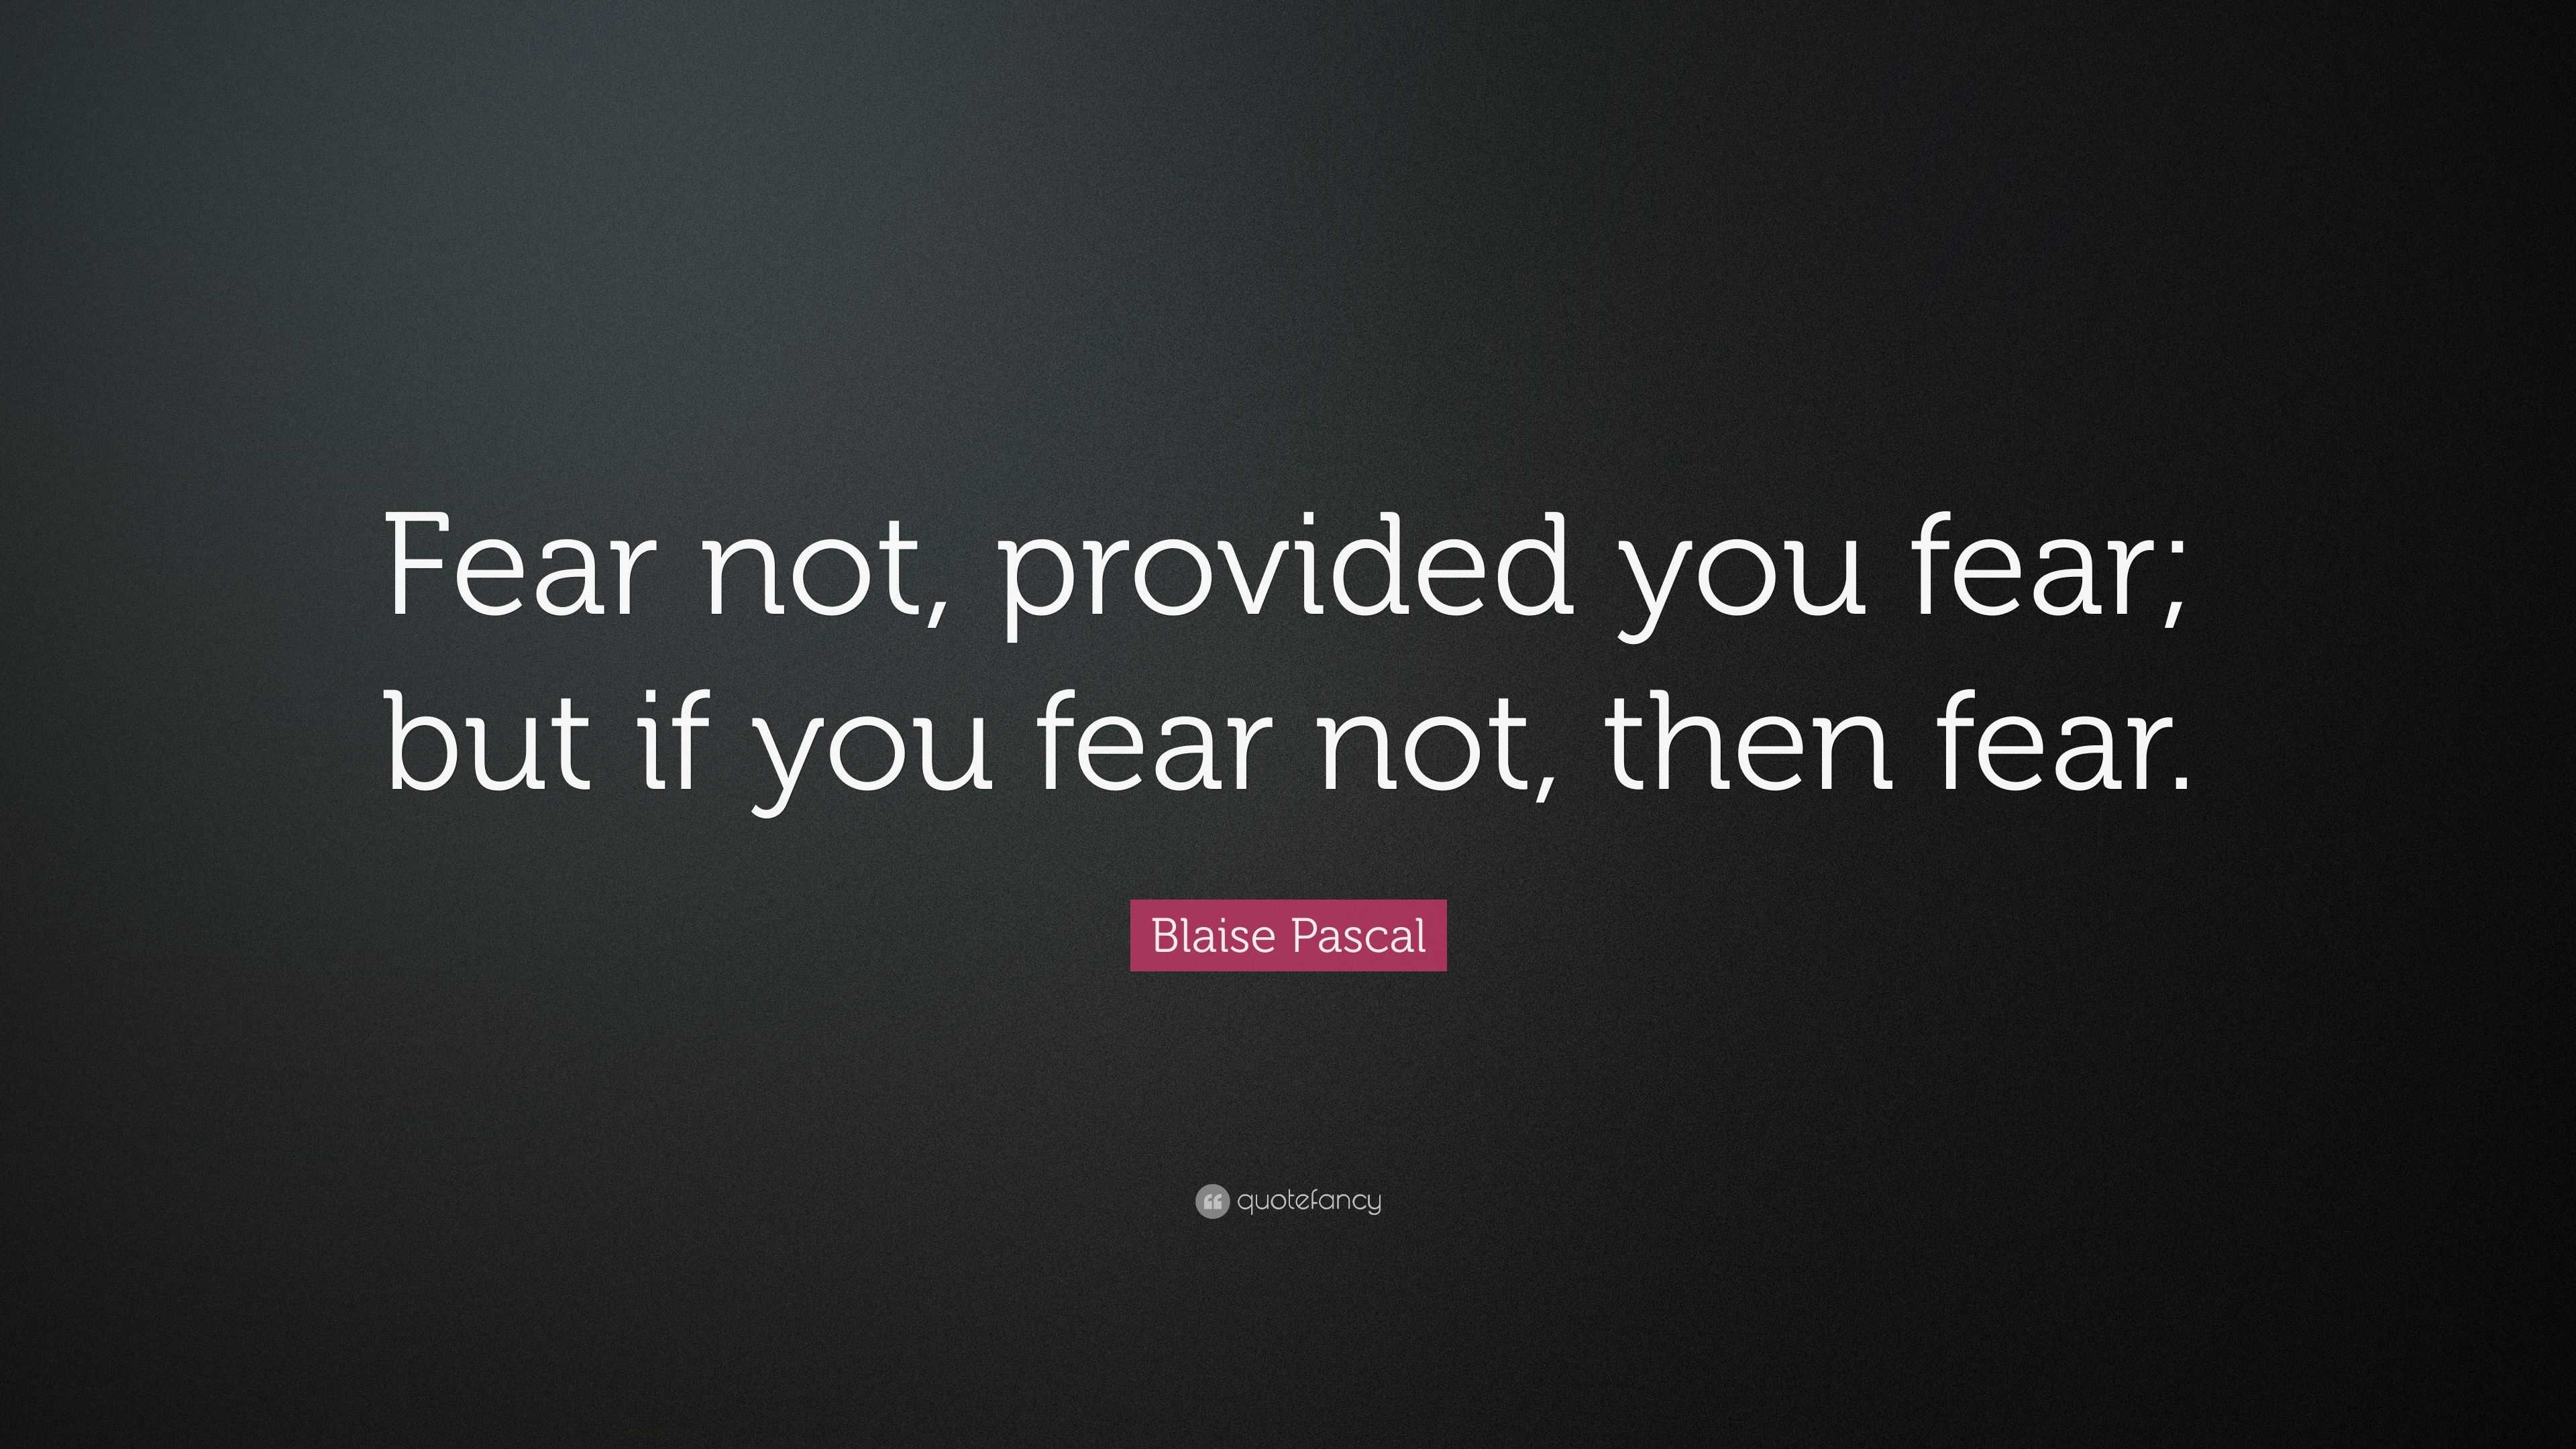 Blaise Pascal Quote: “Fear not, provided you fear; but if you fear not ...